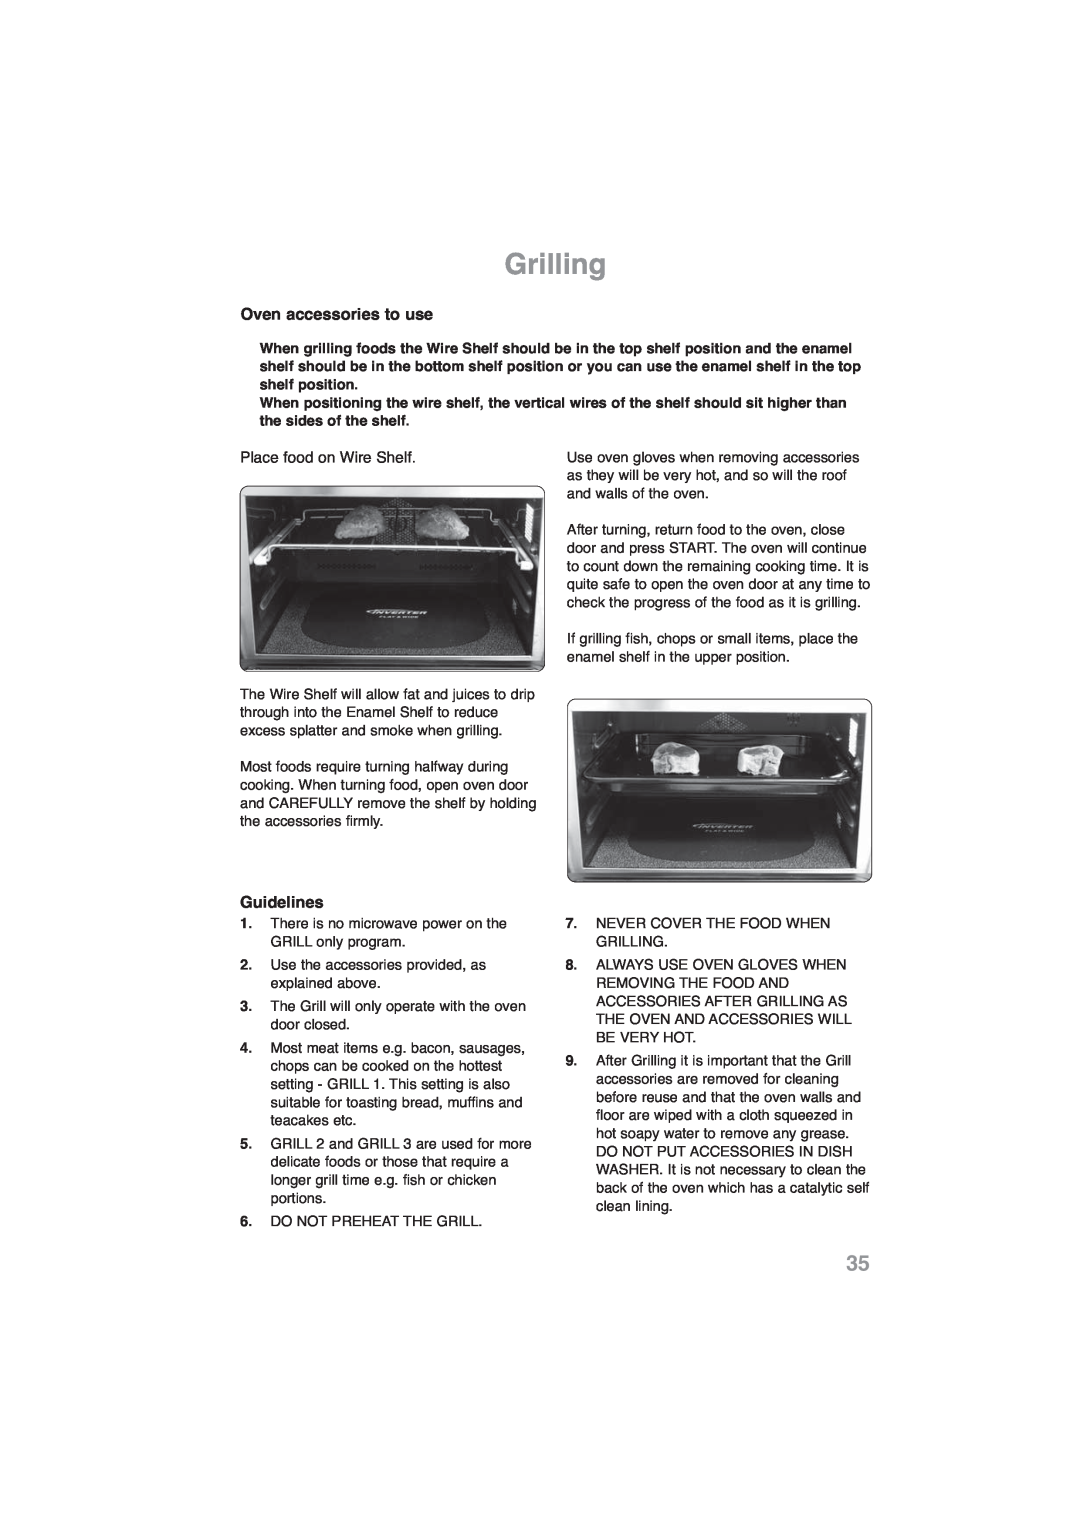 Panasonic NN-CF778S, NN-CF768M operating instructions Grilling, Oven accessories to use, Guidelines 